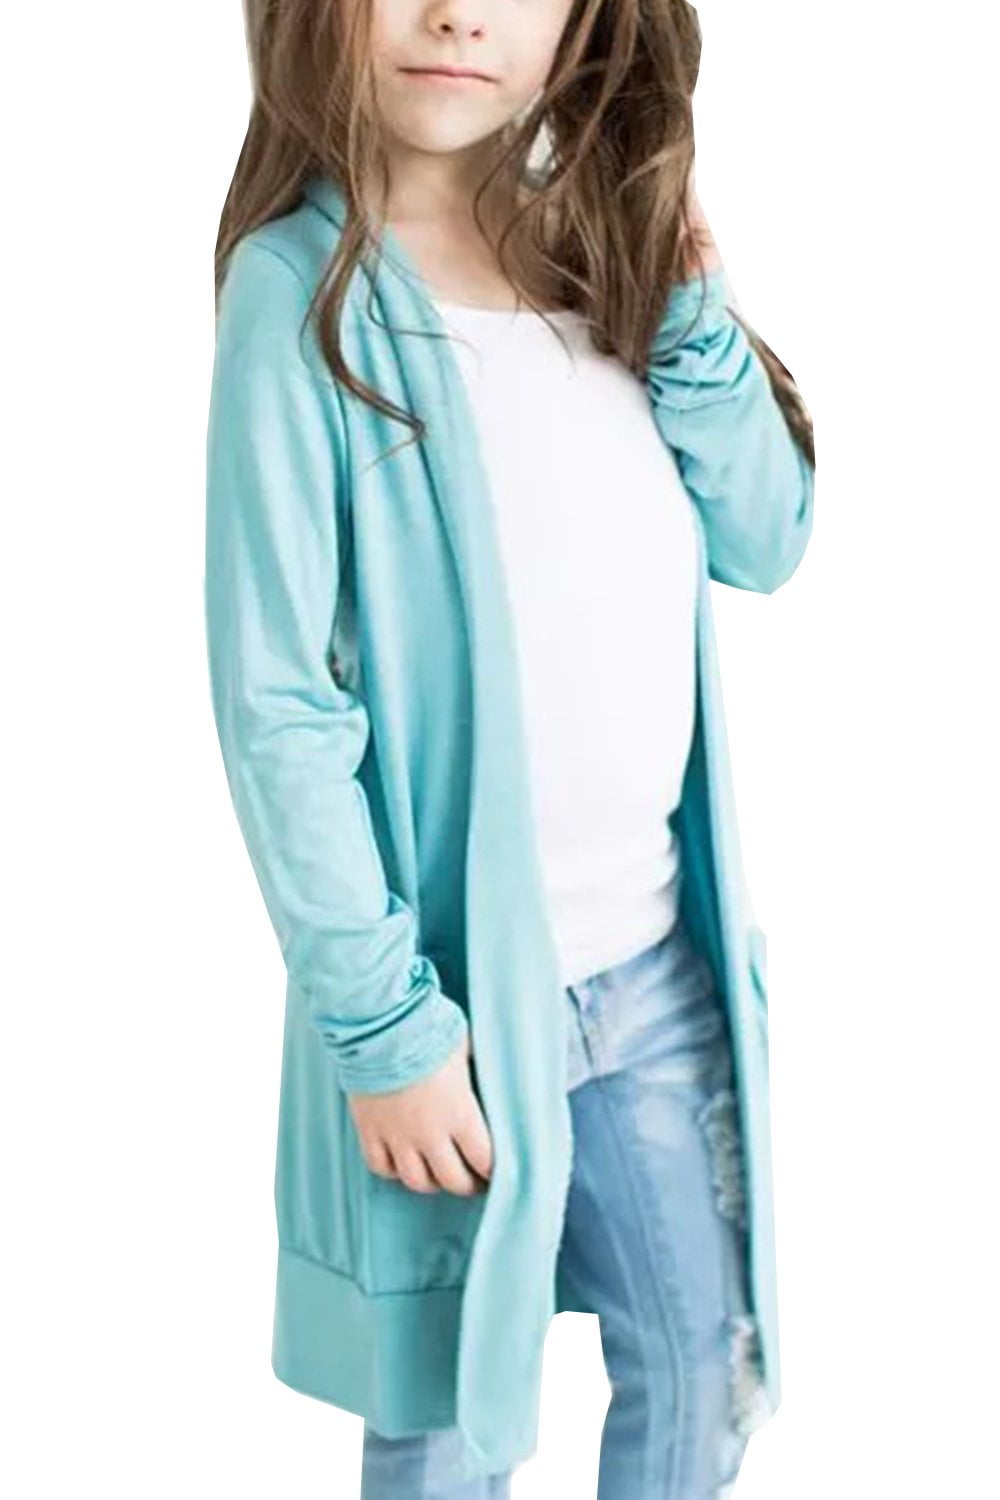 Aelstores Girls Boyfriend Cardigan Plain Long Sleeve Fashion Open Top with Pockets Age 5-14 Years 